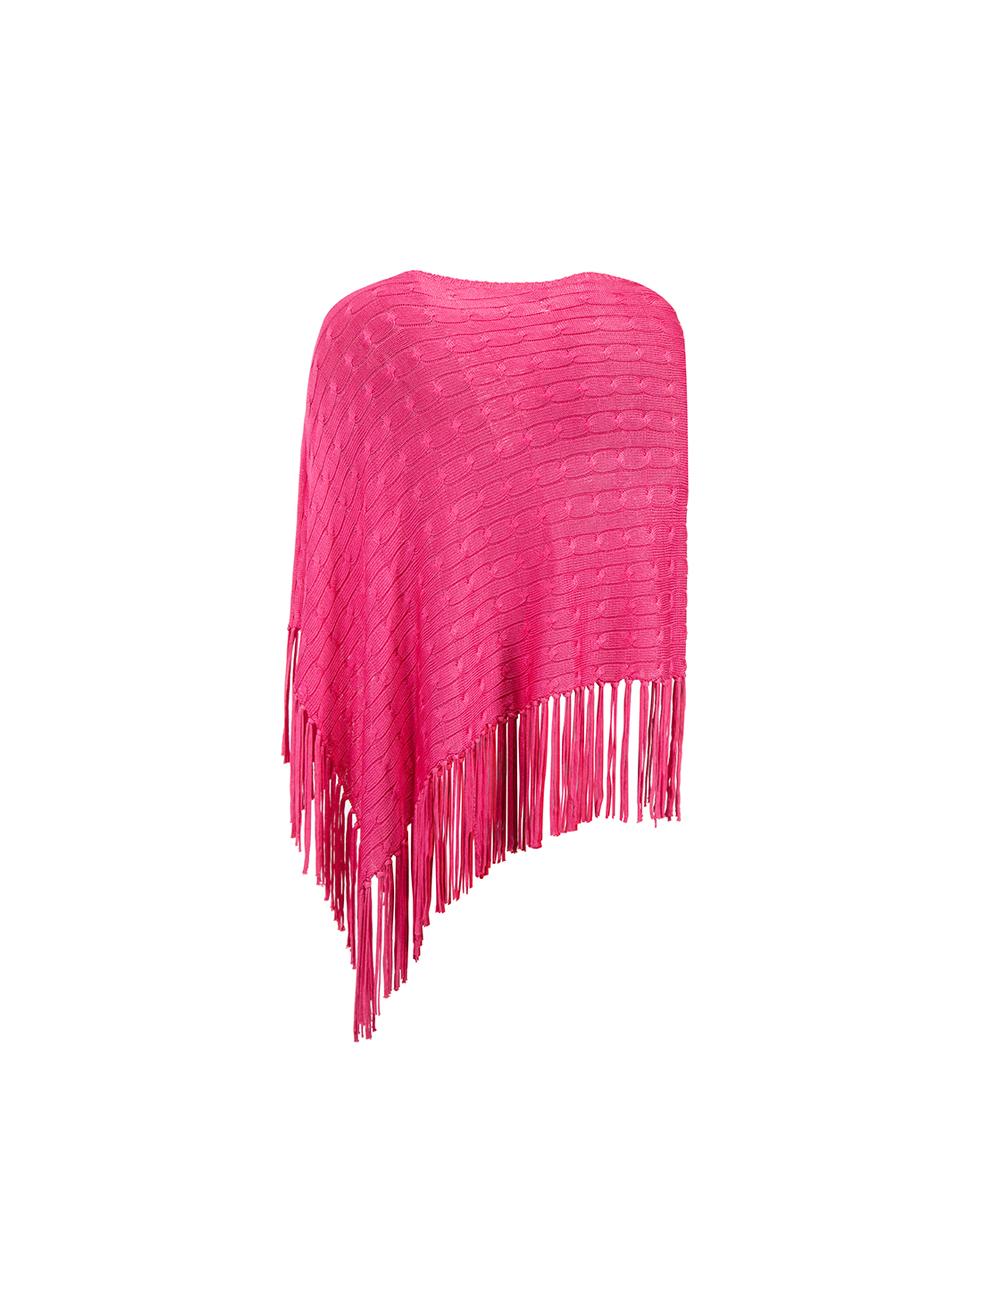 Ralph Lauren Women's Pink Knit Tassel Detail Poncho In Good Condition For Sale In London, GB